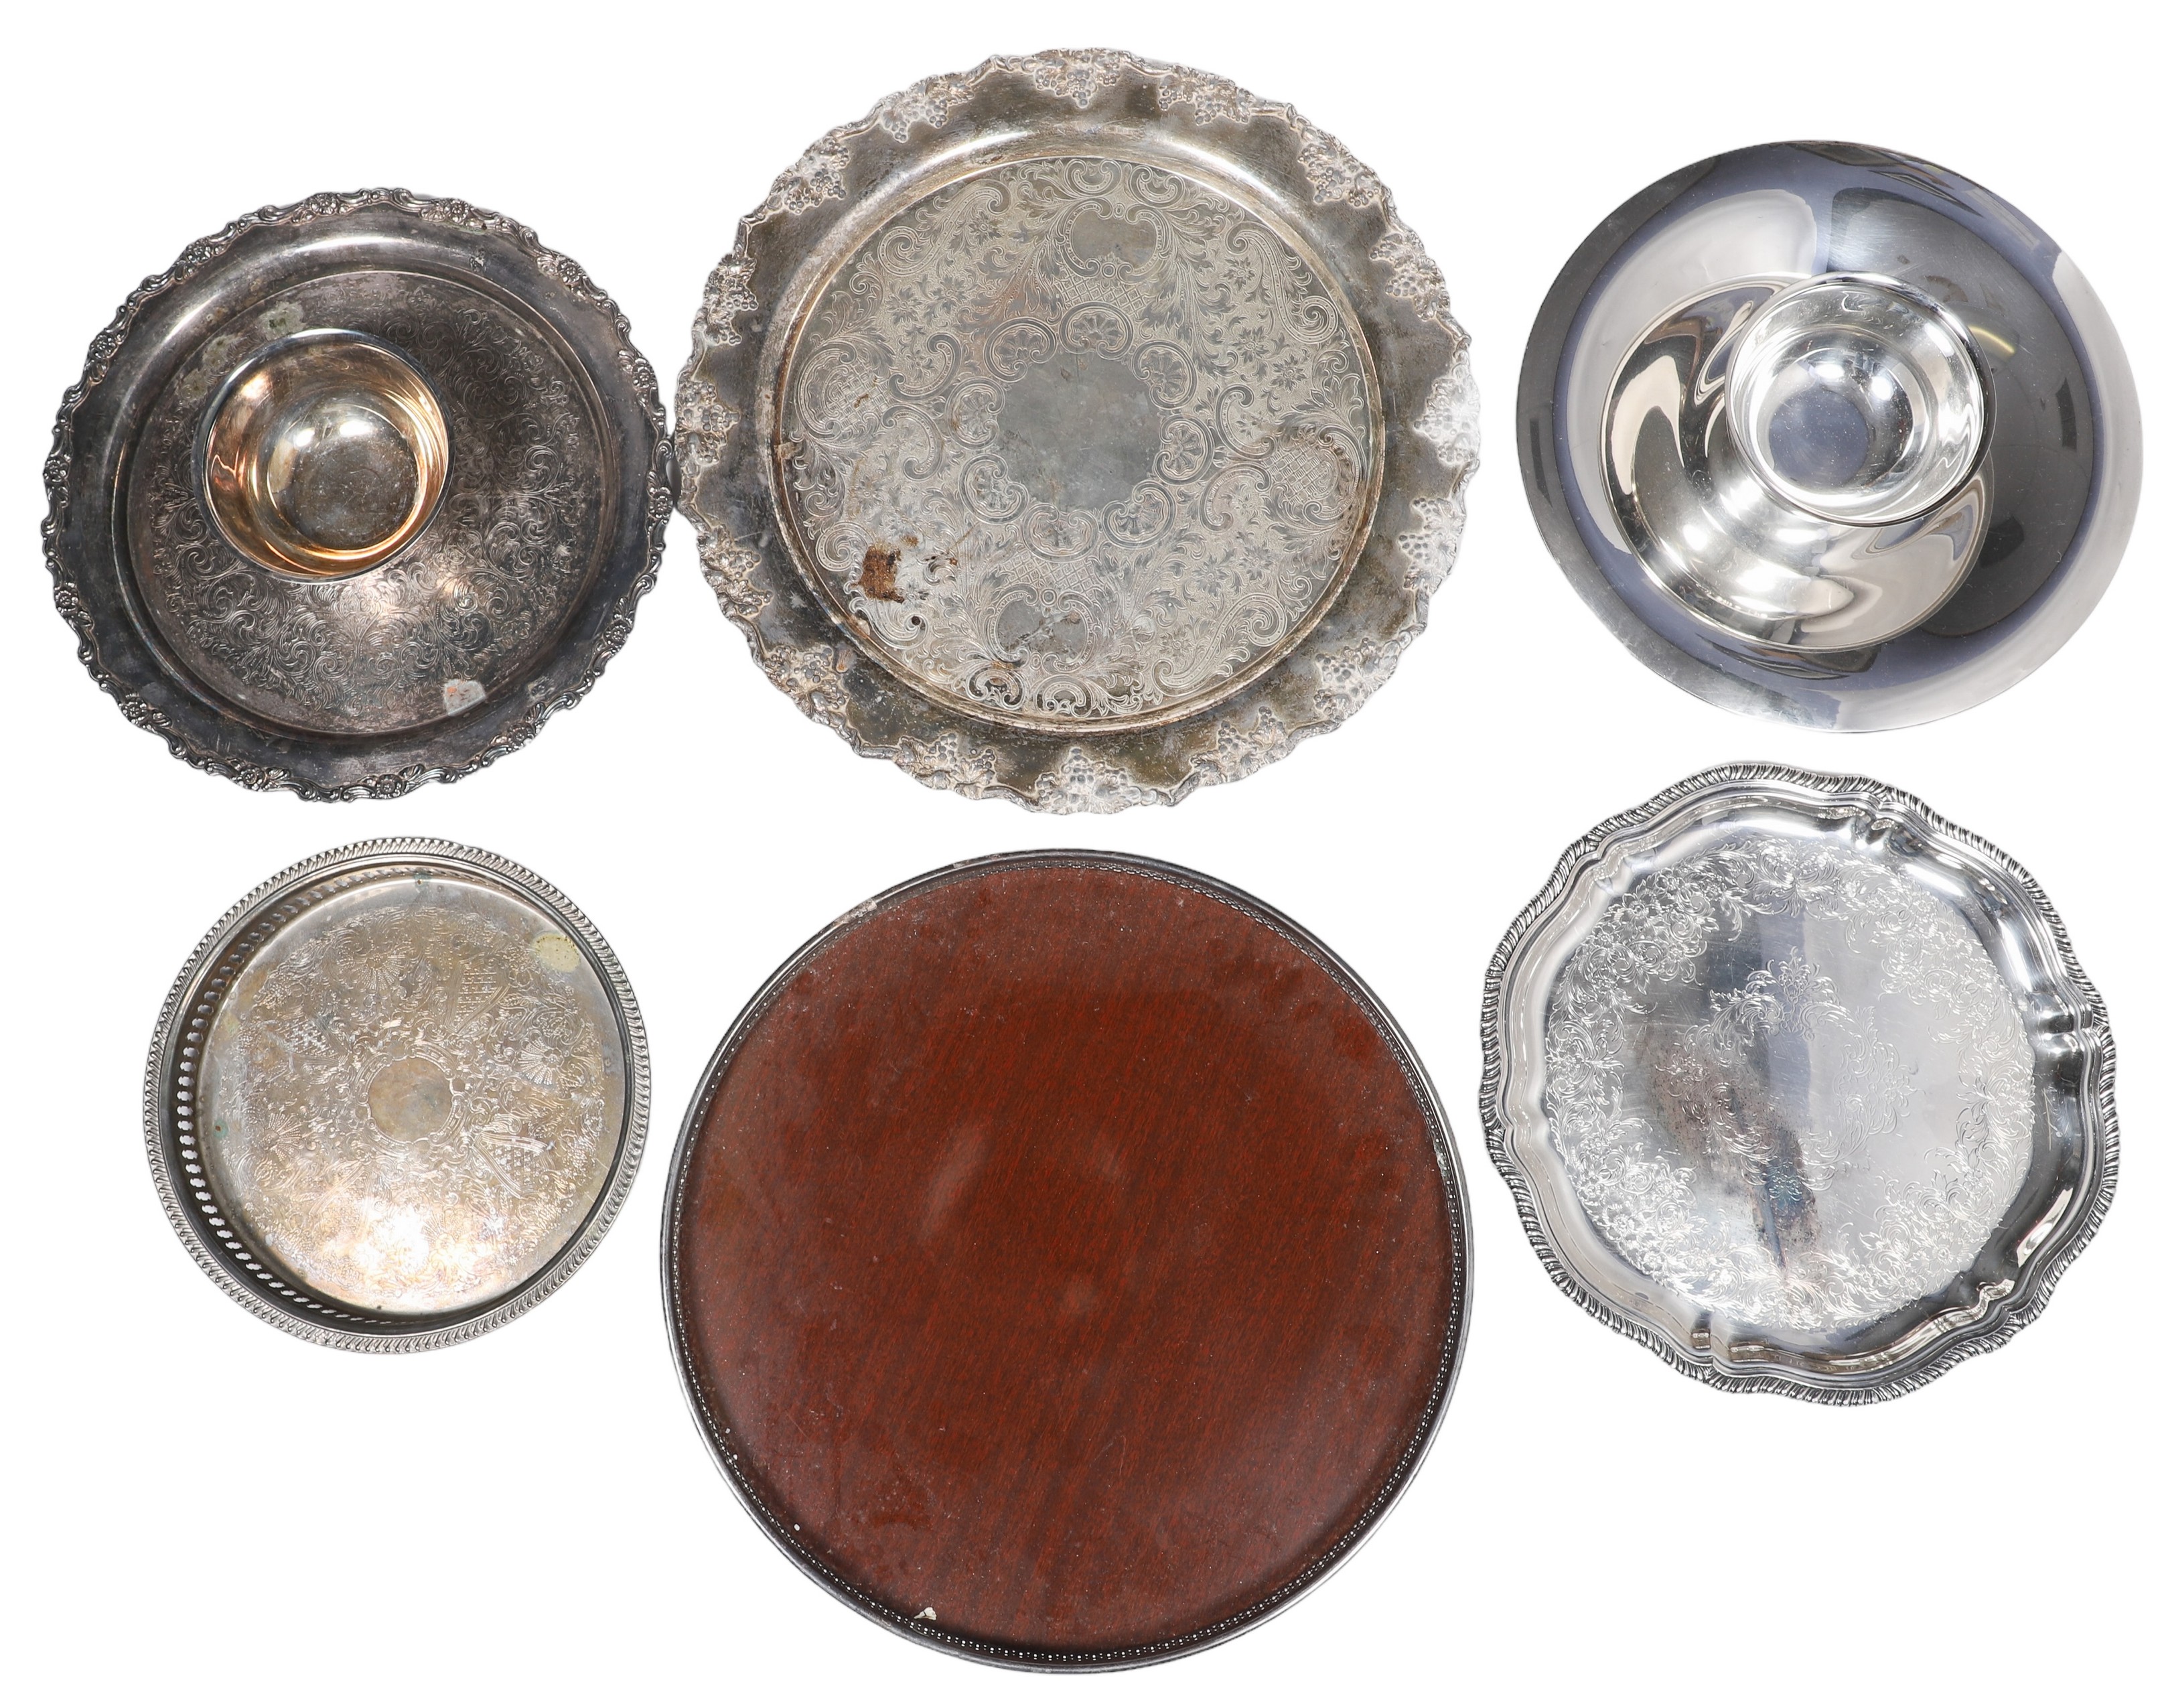  6 Round silver plate trays including 2e129c